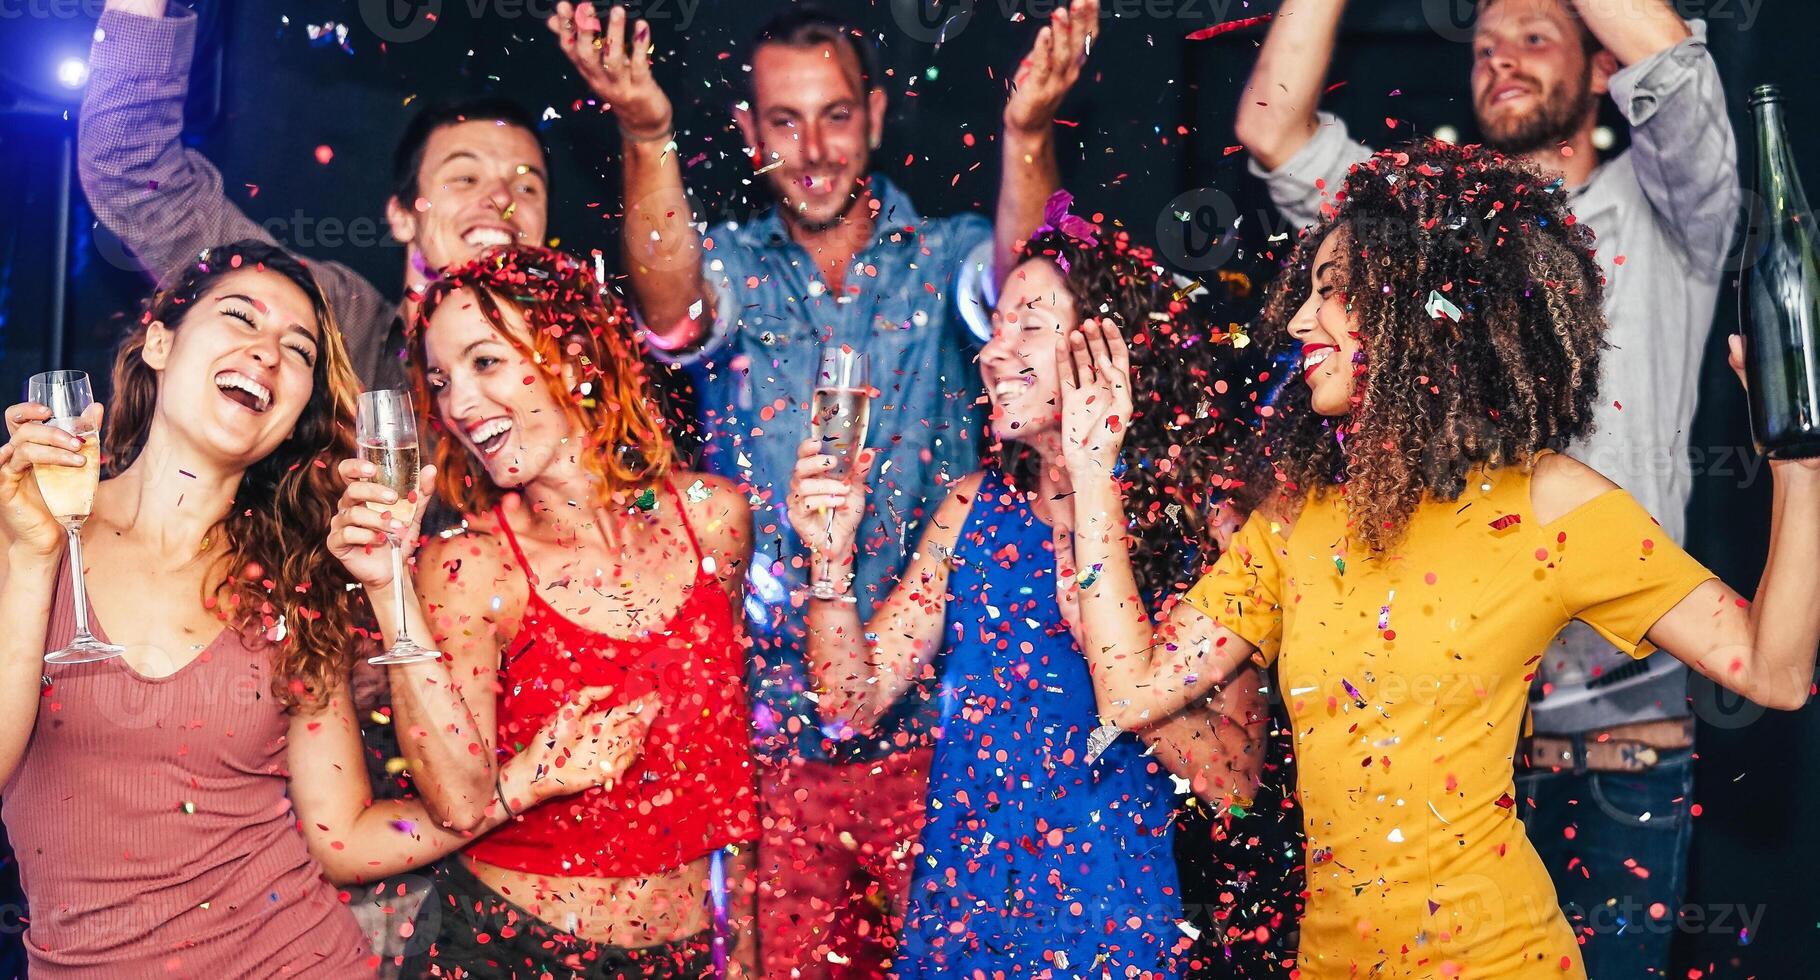 Happy friends doing party dancing and drinking champagne at nightclub - Millennial young people having fun celebrating together and throwing confetti - Entertainment, youth lifestyle holidays concept photo